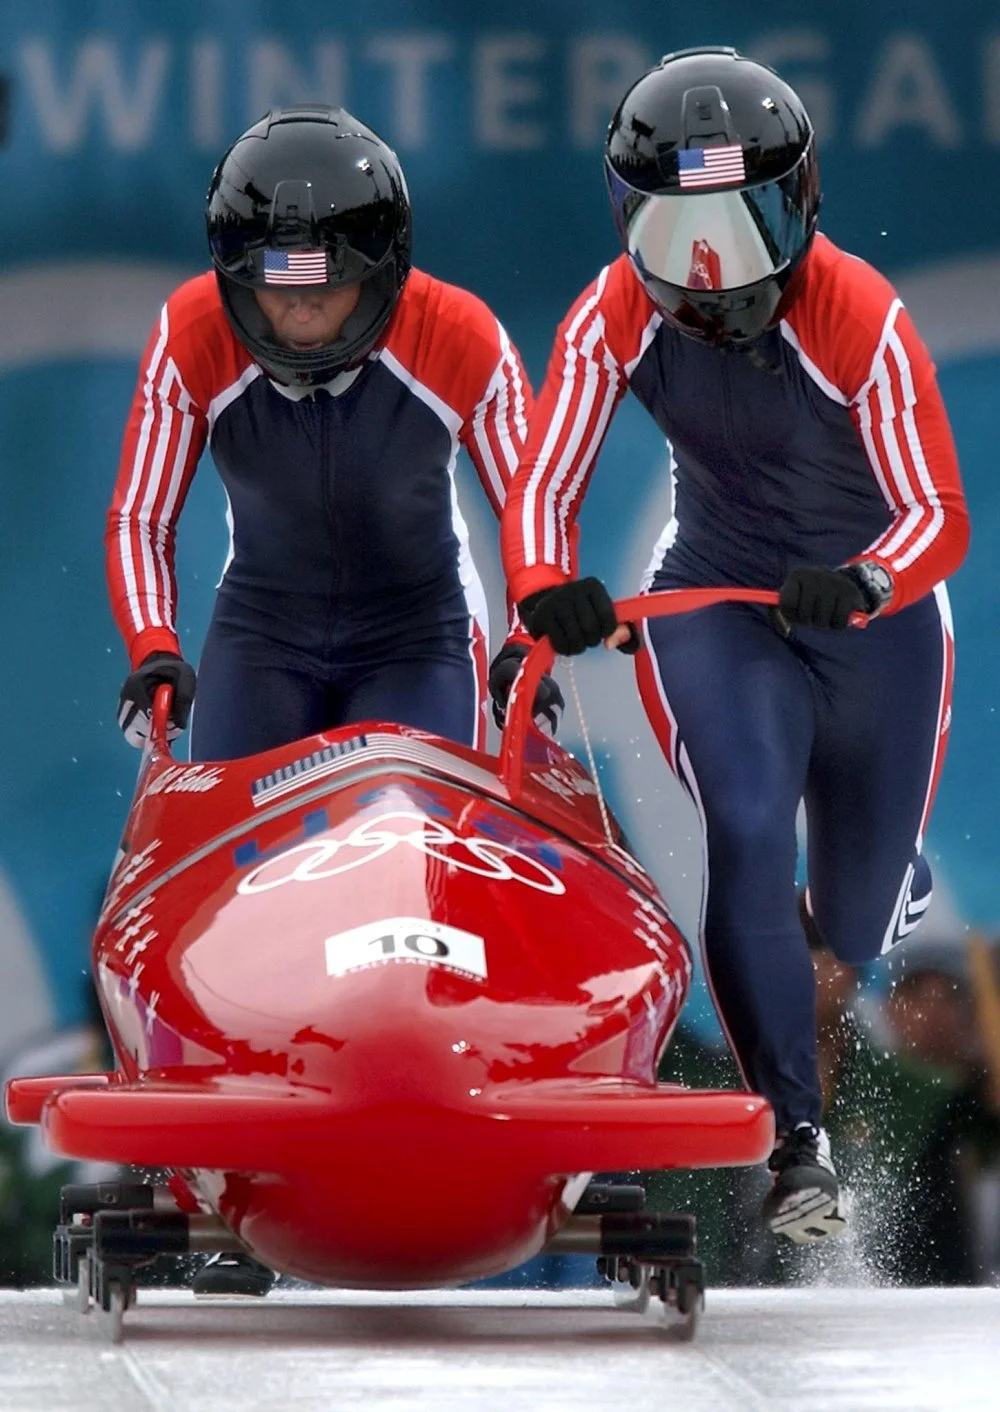 Vonetta Flowers (left) and Jill Bakken power up in the push zone for their 80-mile-per-hour (130 km/h) ride down the Winter Olympic bobsledding track. Bakken, the driver, and Flowers, the brakeman, won the first gold medal presented in Olympic women's bobsledding (2002)/the United States Navy/Wikimedia Commons